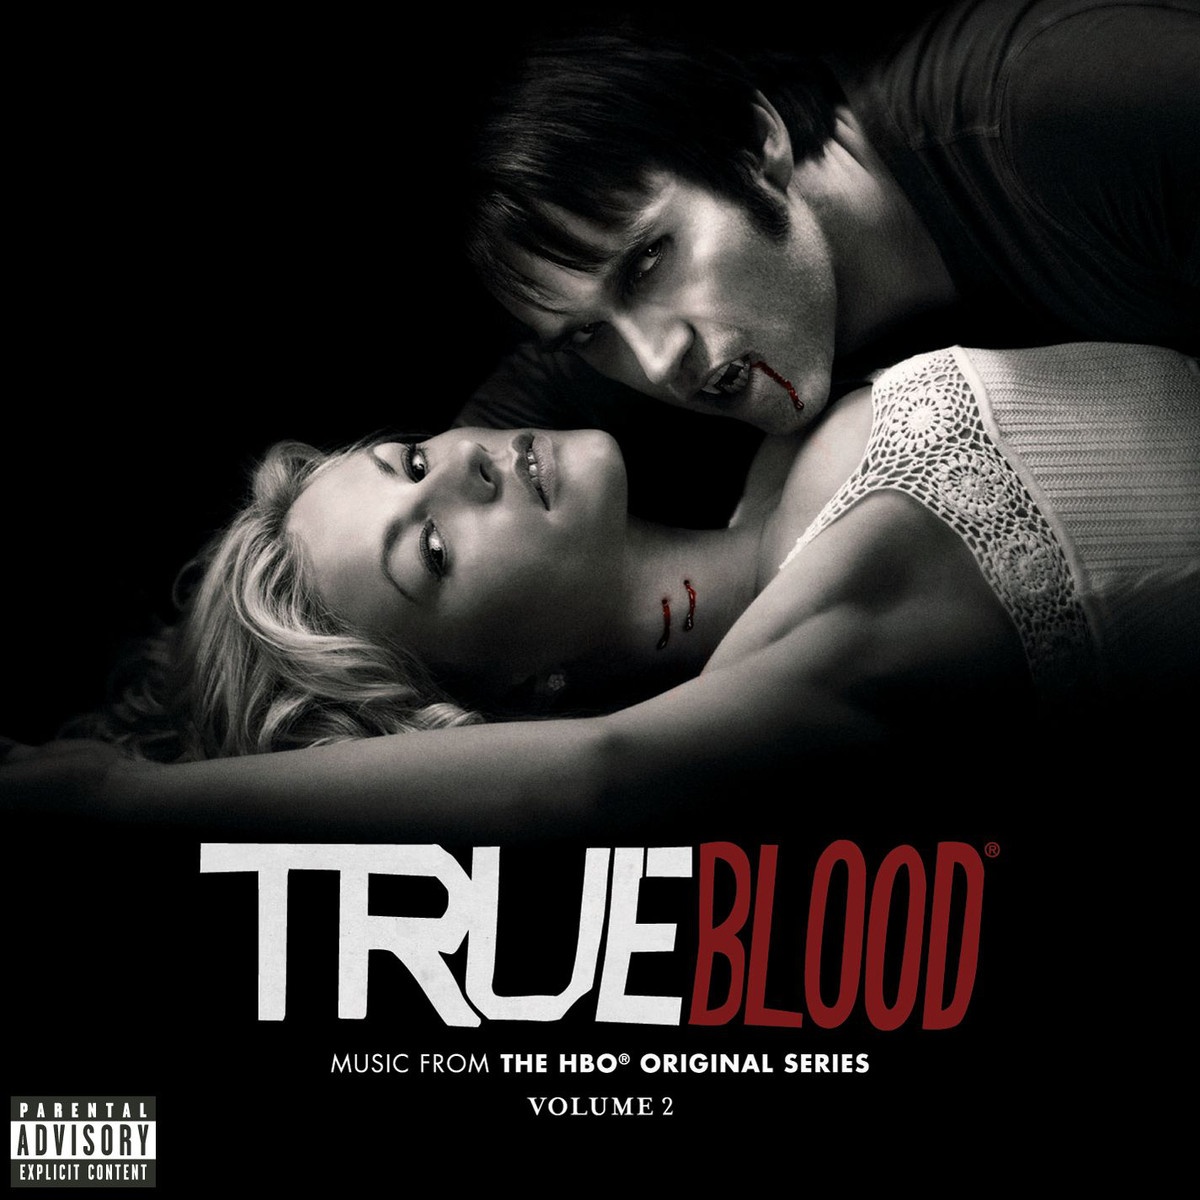 True Blood (Music From The HBO Original Series Volume 2)